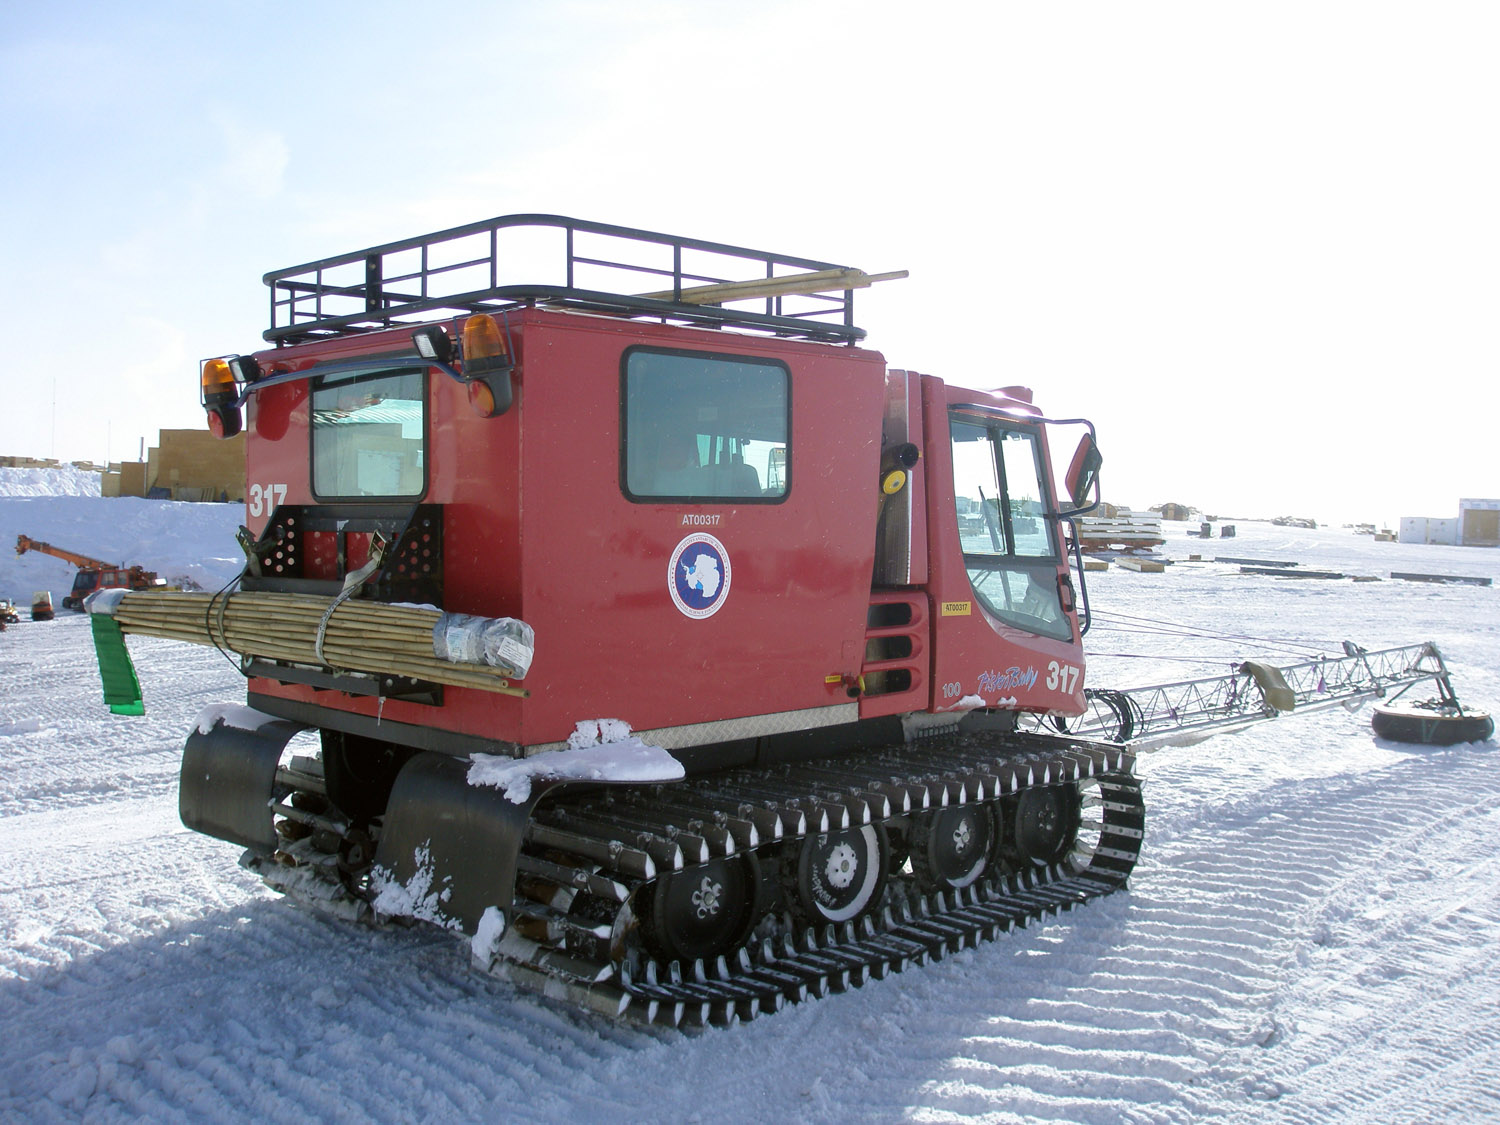 Vehicles and equipment of the South Pole Traverse - 10 - Pisten Bully